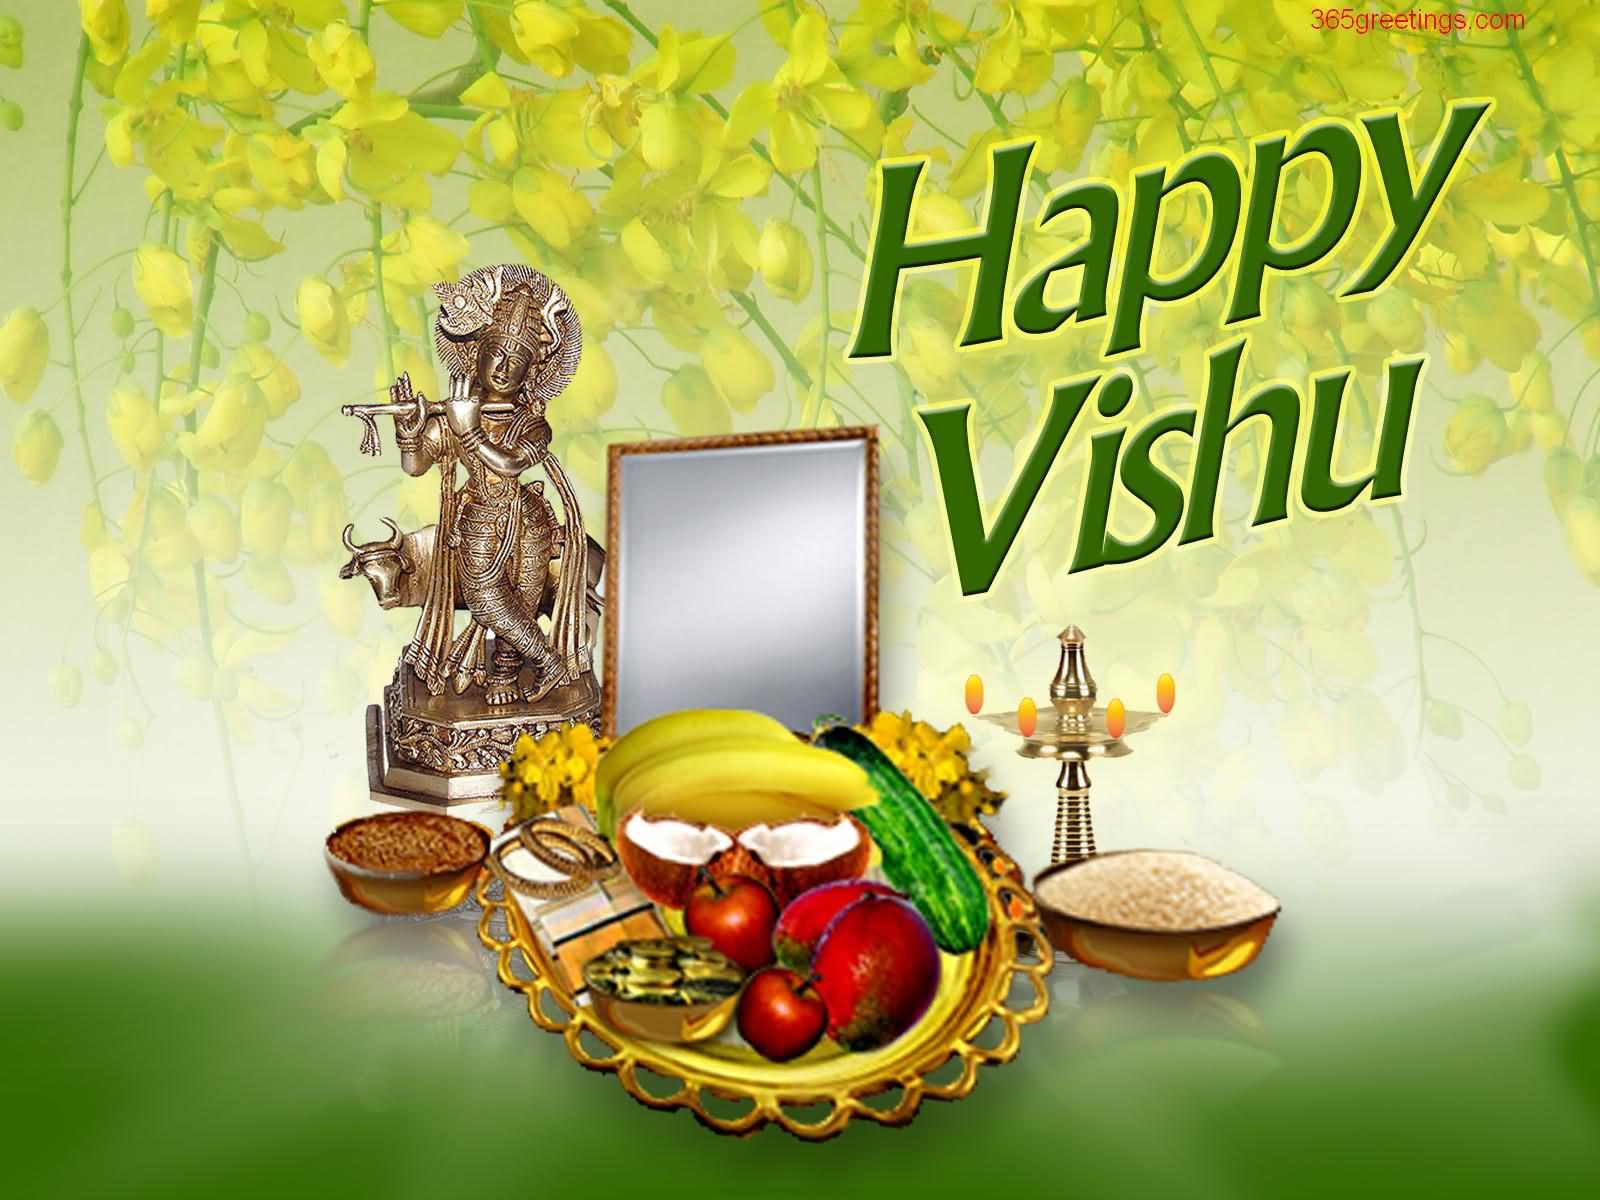 Happy Vishu To You And Your Family